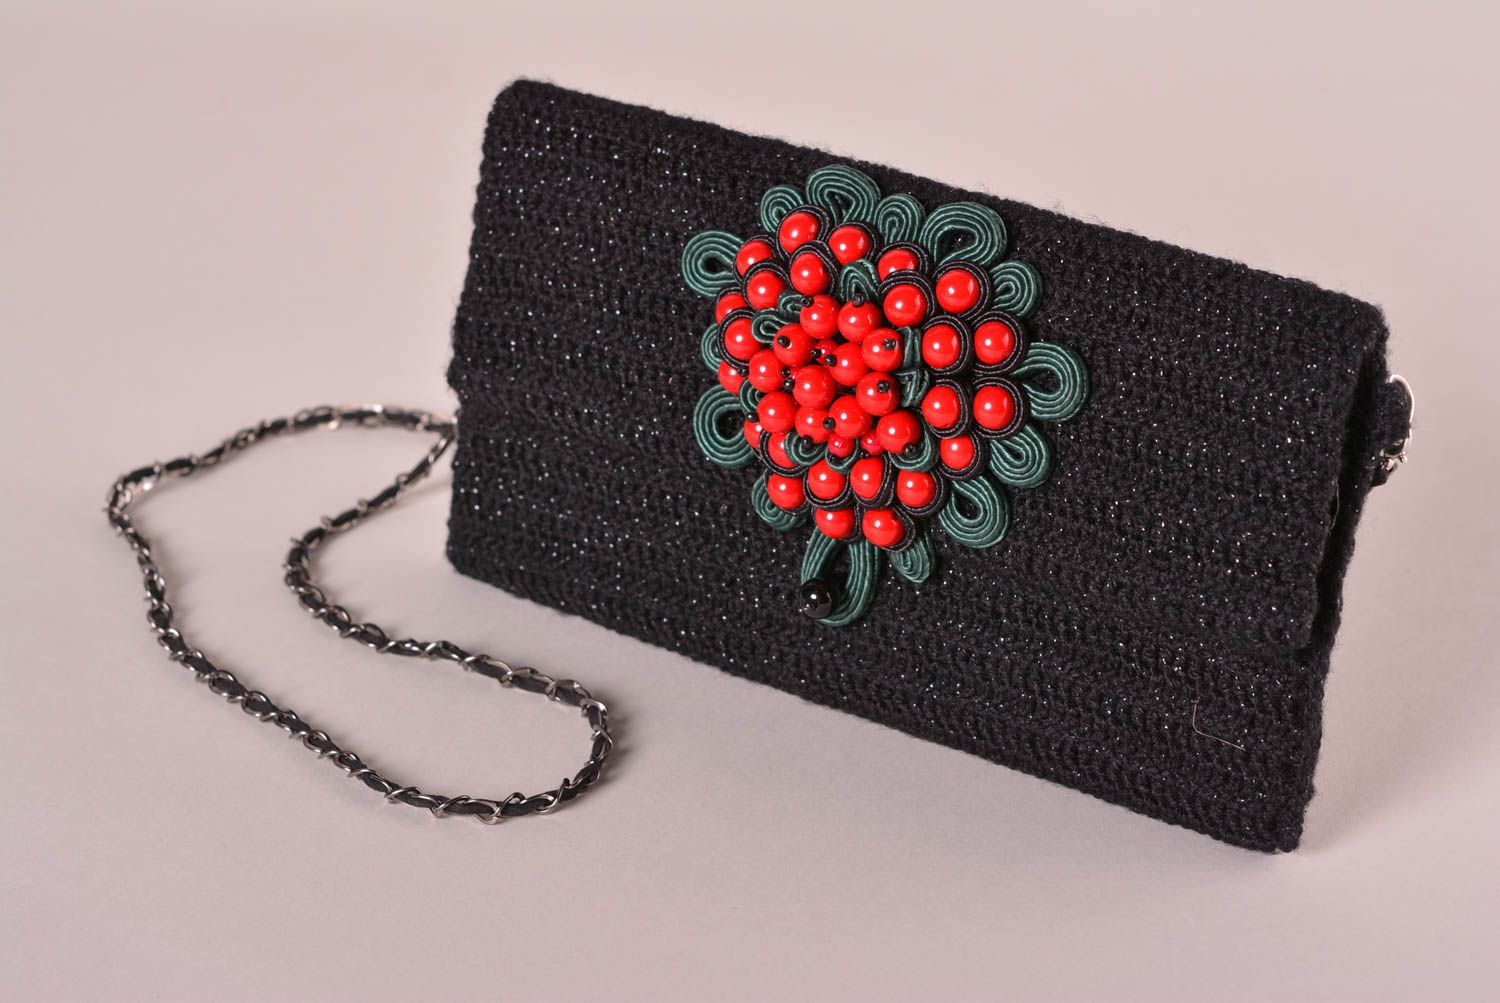 Handmade clutch bag soutache purse for women designer accessories gifts for her photo 1